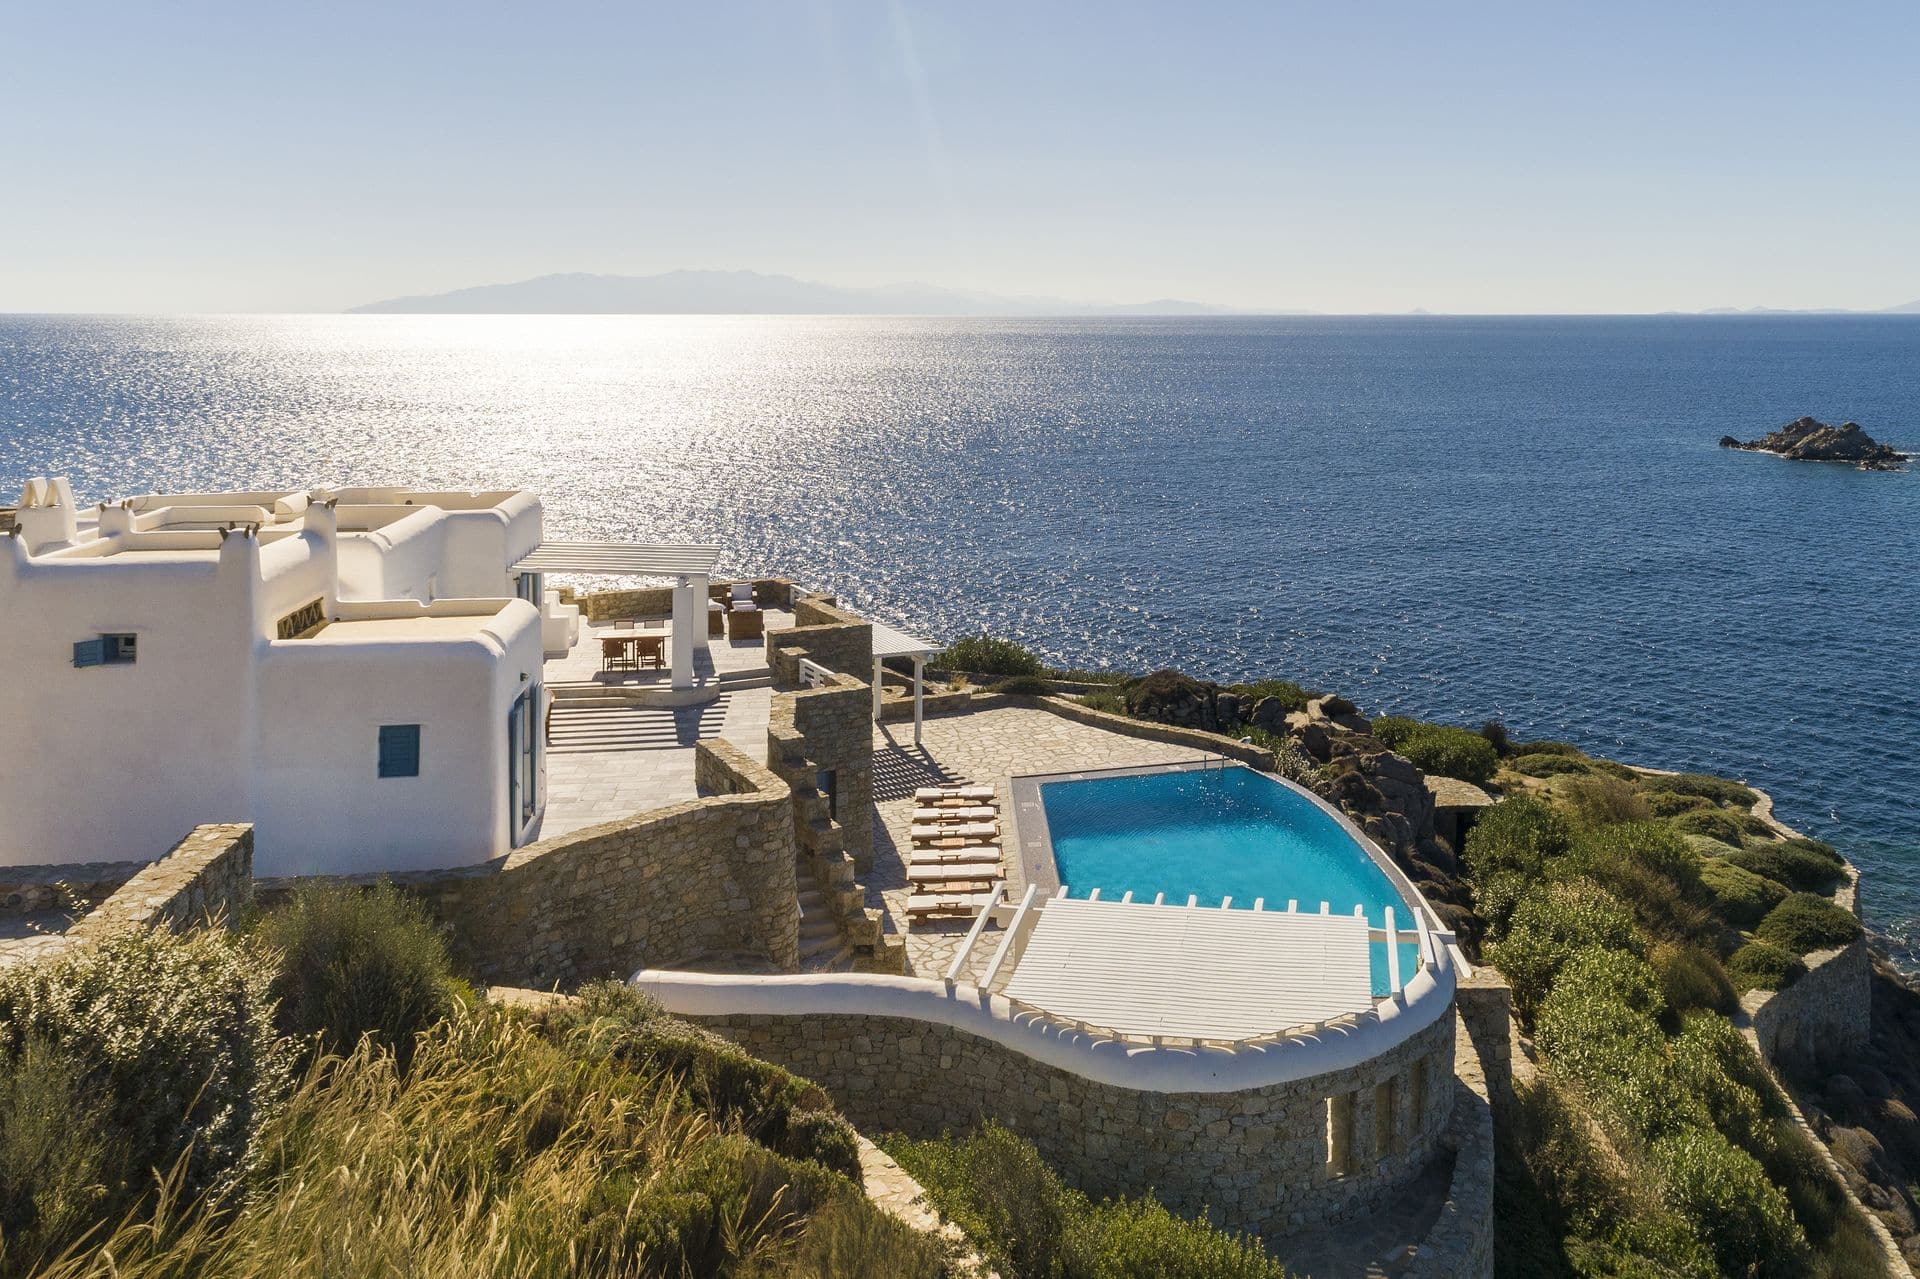 One of AGL Luxury villas in Mykonos with pools, aerial view.